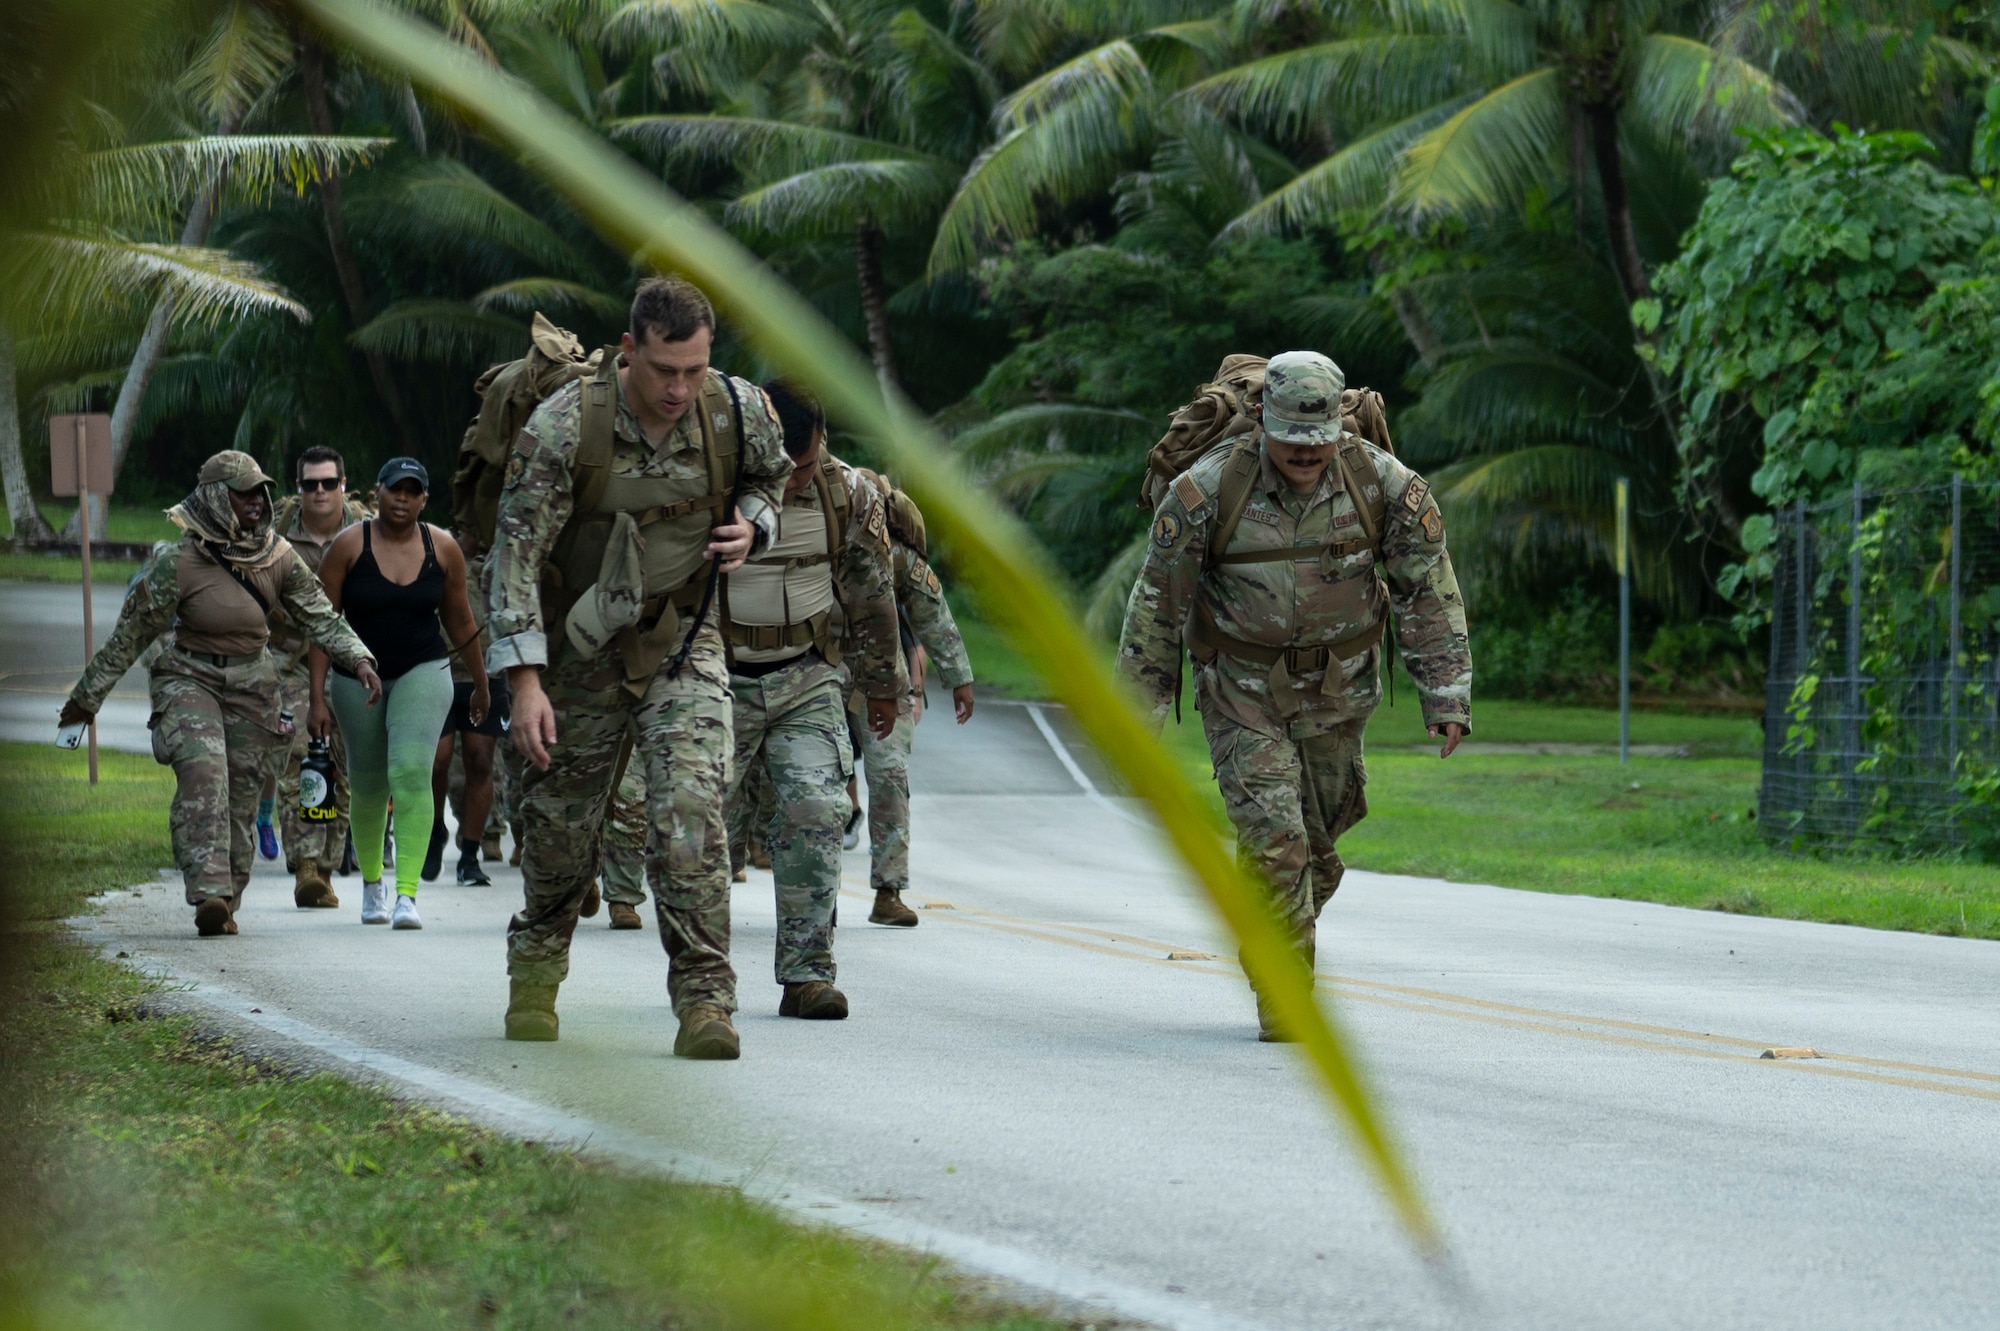 U.S. Air Force service members and their families walk from Tarague beach to Sanders Slope during the Office of Special Investigations’ Hustler-6 memorial event on Andersen Air Force Base, Guam, Dec. 21, 2022. Since 2016, OSI agents assigned to Andersen AFB have annually honored the Hustler-6, who lost their lives during a mission near Bagram, Afghanistan on Dec. 21, 2015, by rucking up and down Sanders Slope. (U.S. Air Force photo by Airman Spencer Perkins)